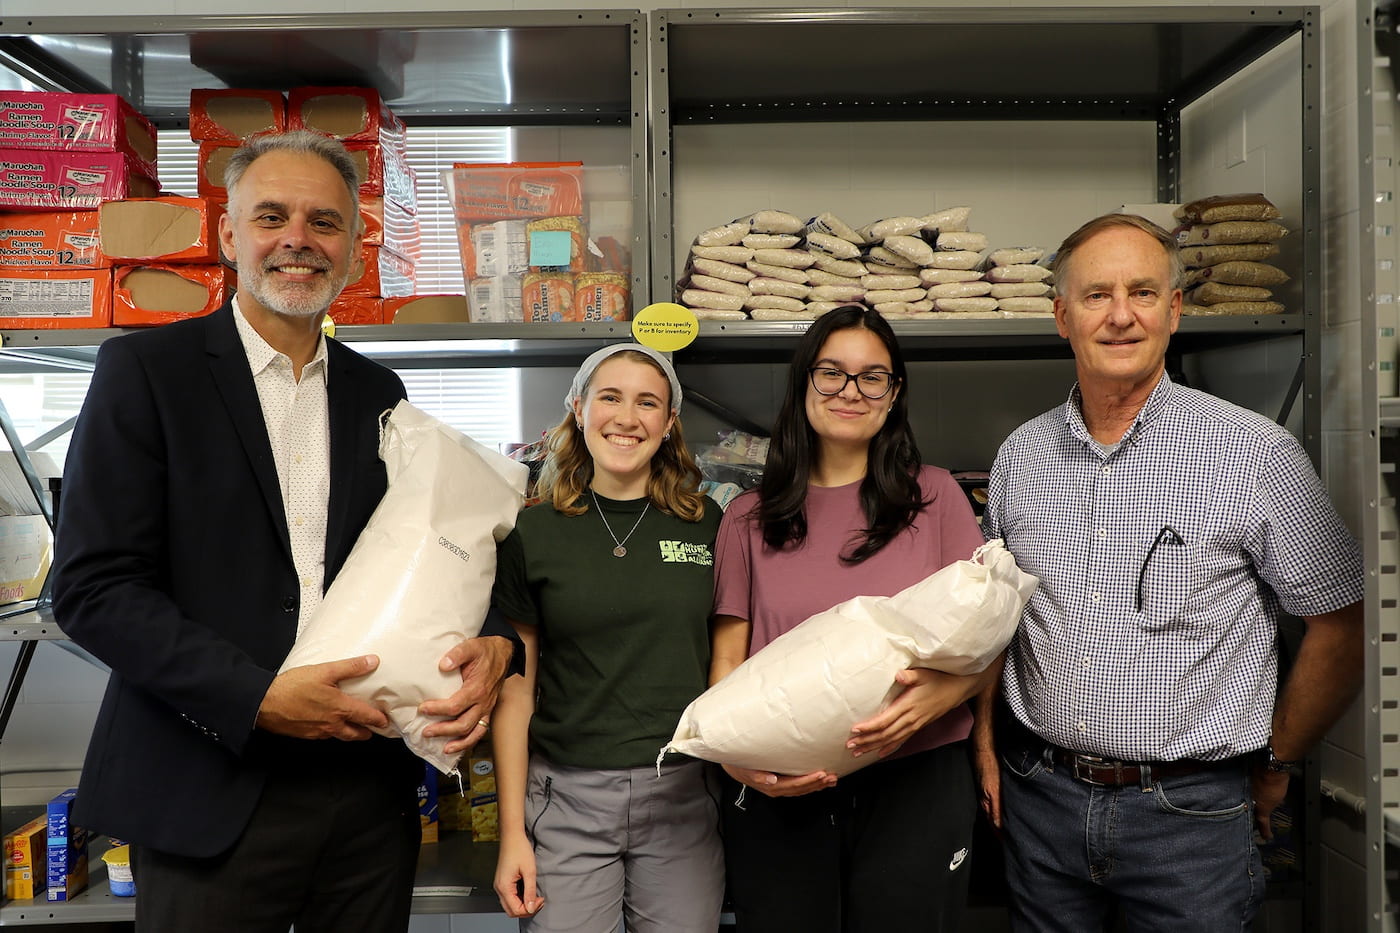 Arkansas Agricultural Experiment Station Director Jean-Francois Meullenet, left, and Assistant Director Nathan McKinney, right, joined student volunteers Katelyn Helberg and Caroline Wilson for the intake of rice donations to the Jane B. Gearhart Full Circle Food Pantry at the University of Arkansas.